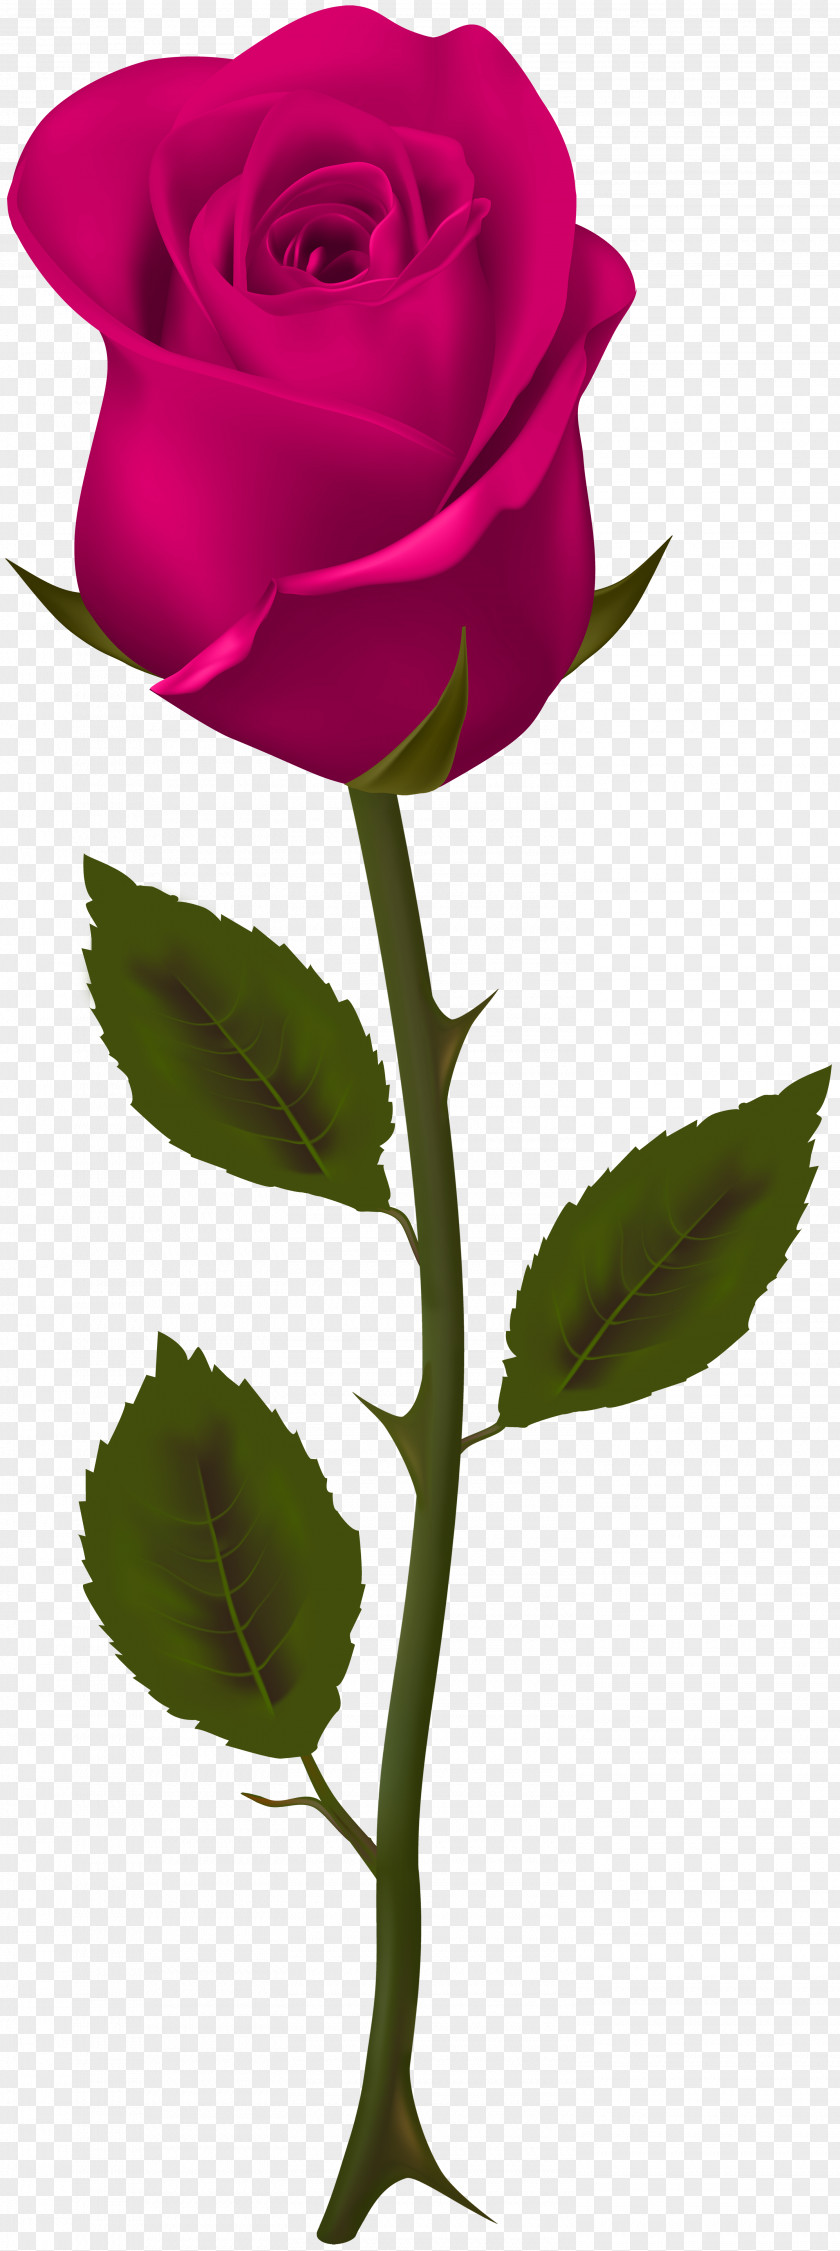 Roese Streamer Rose Image Clip Art Pink PNG